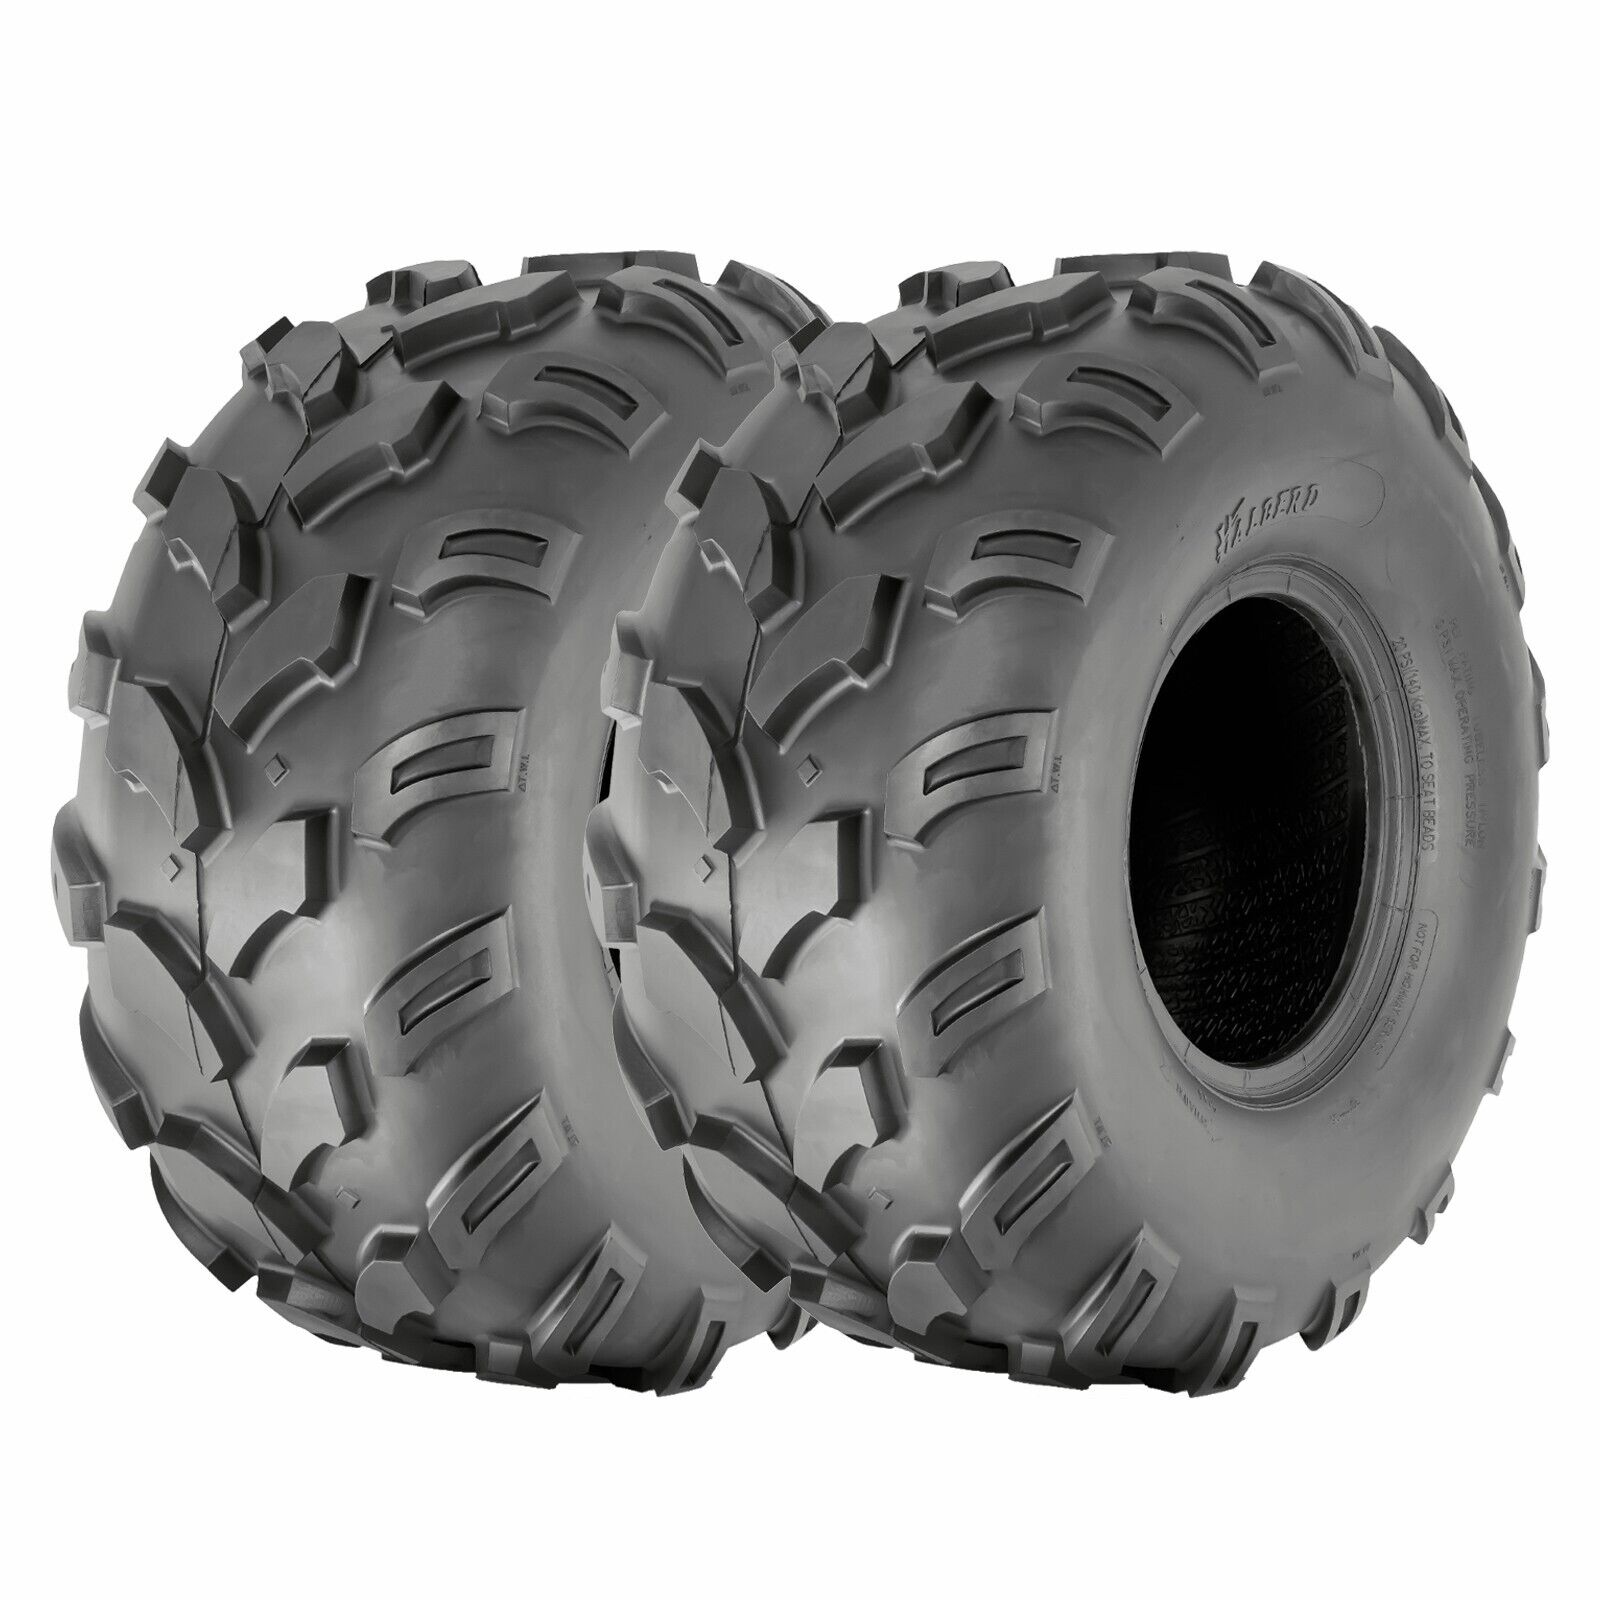 Set Of 2 20x9.5-8 ATV Tires 20x9.5x8 Replacement 4Ply Heavy Duty Tubeless Tyres